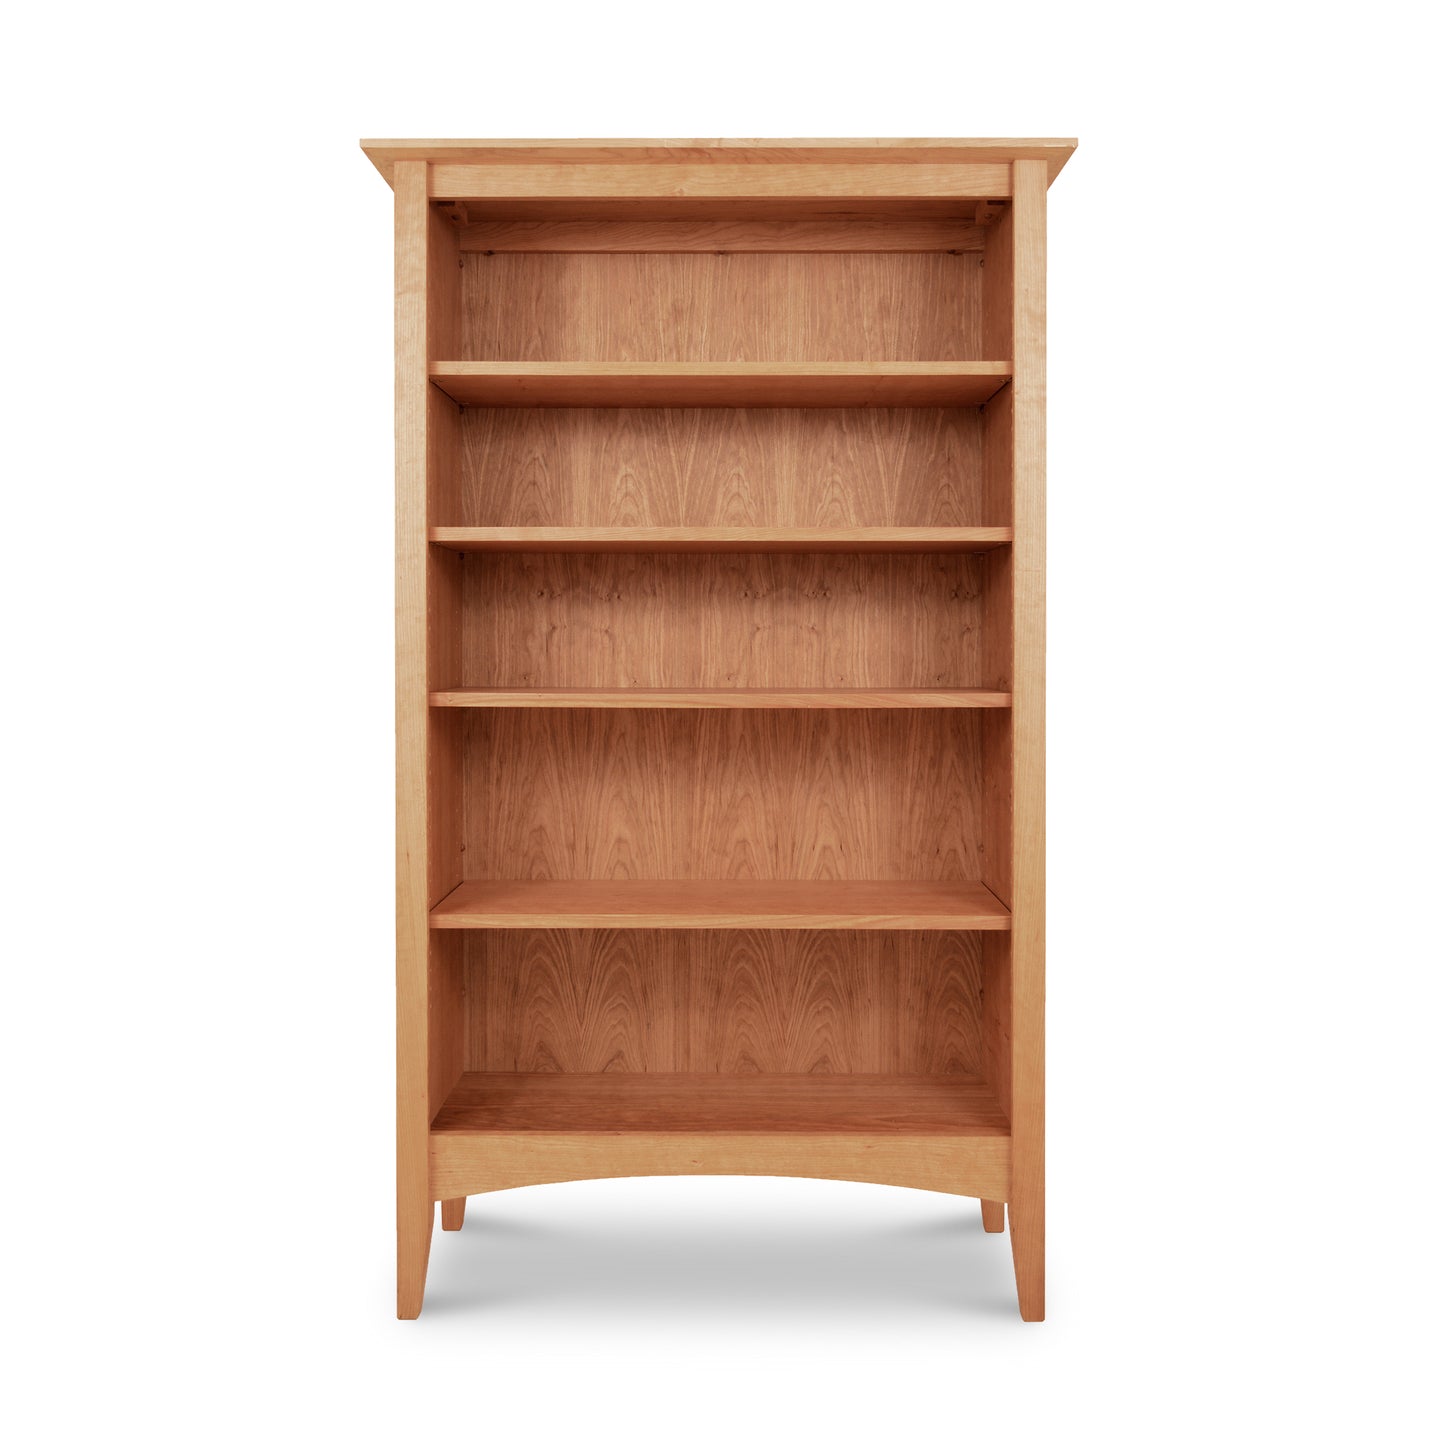 Maple Corner Woodworks American Shaker bookcase with four shelves, crafted from sustainably harvested hardwoods, on a white background.